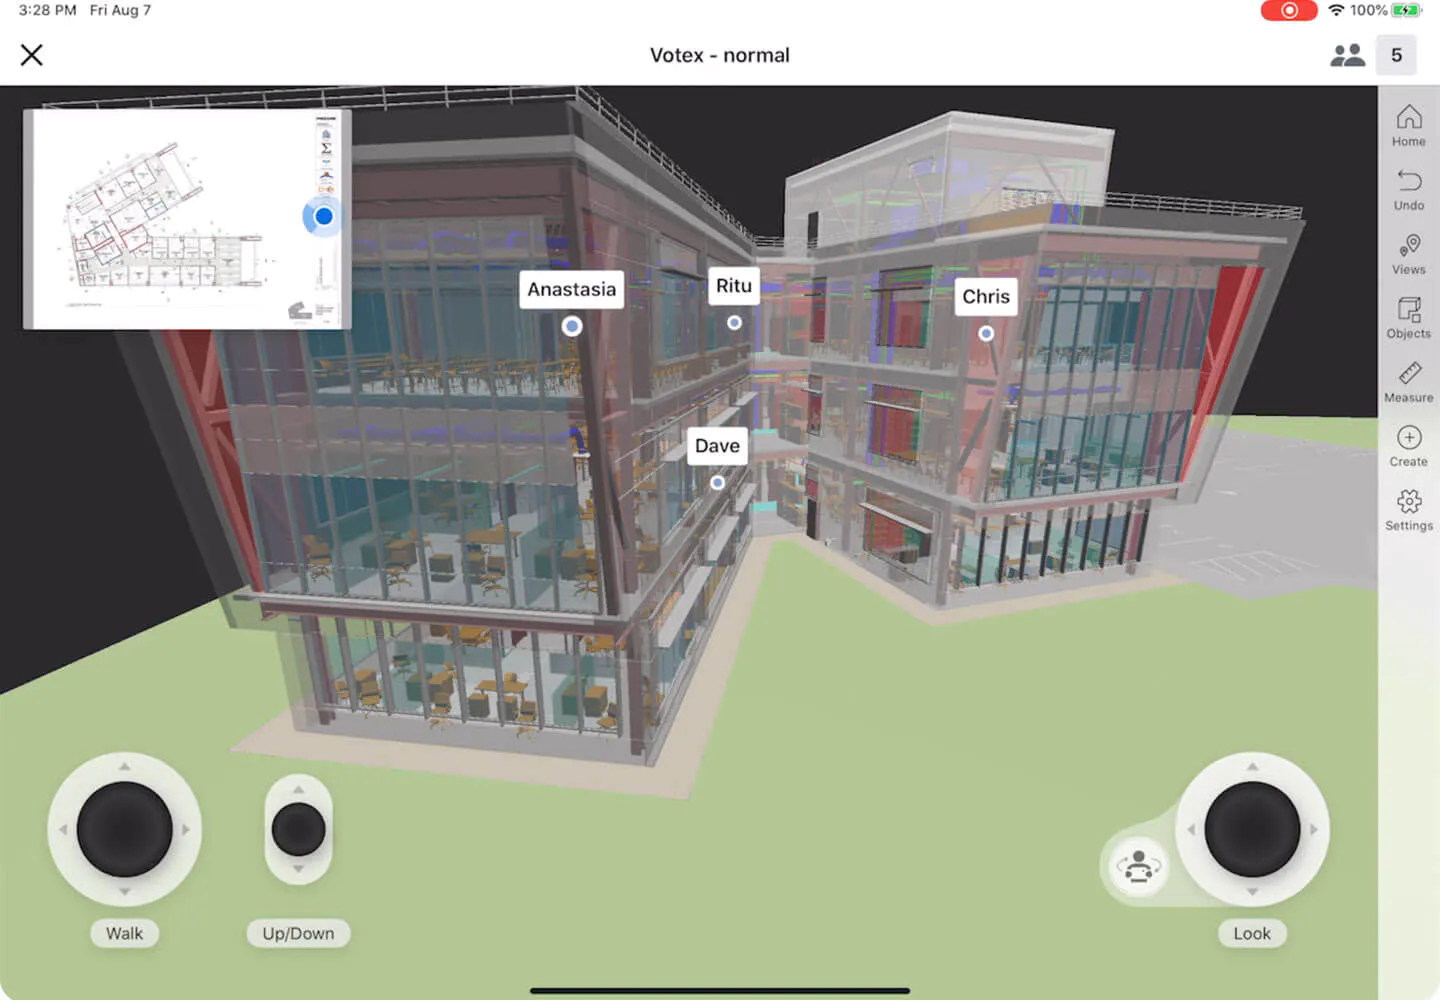 Screencapture from Procore's BIM software in use.